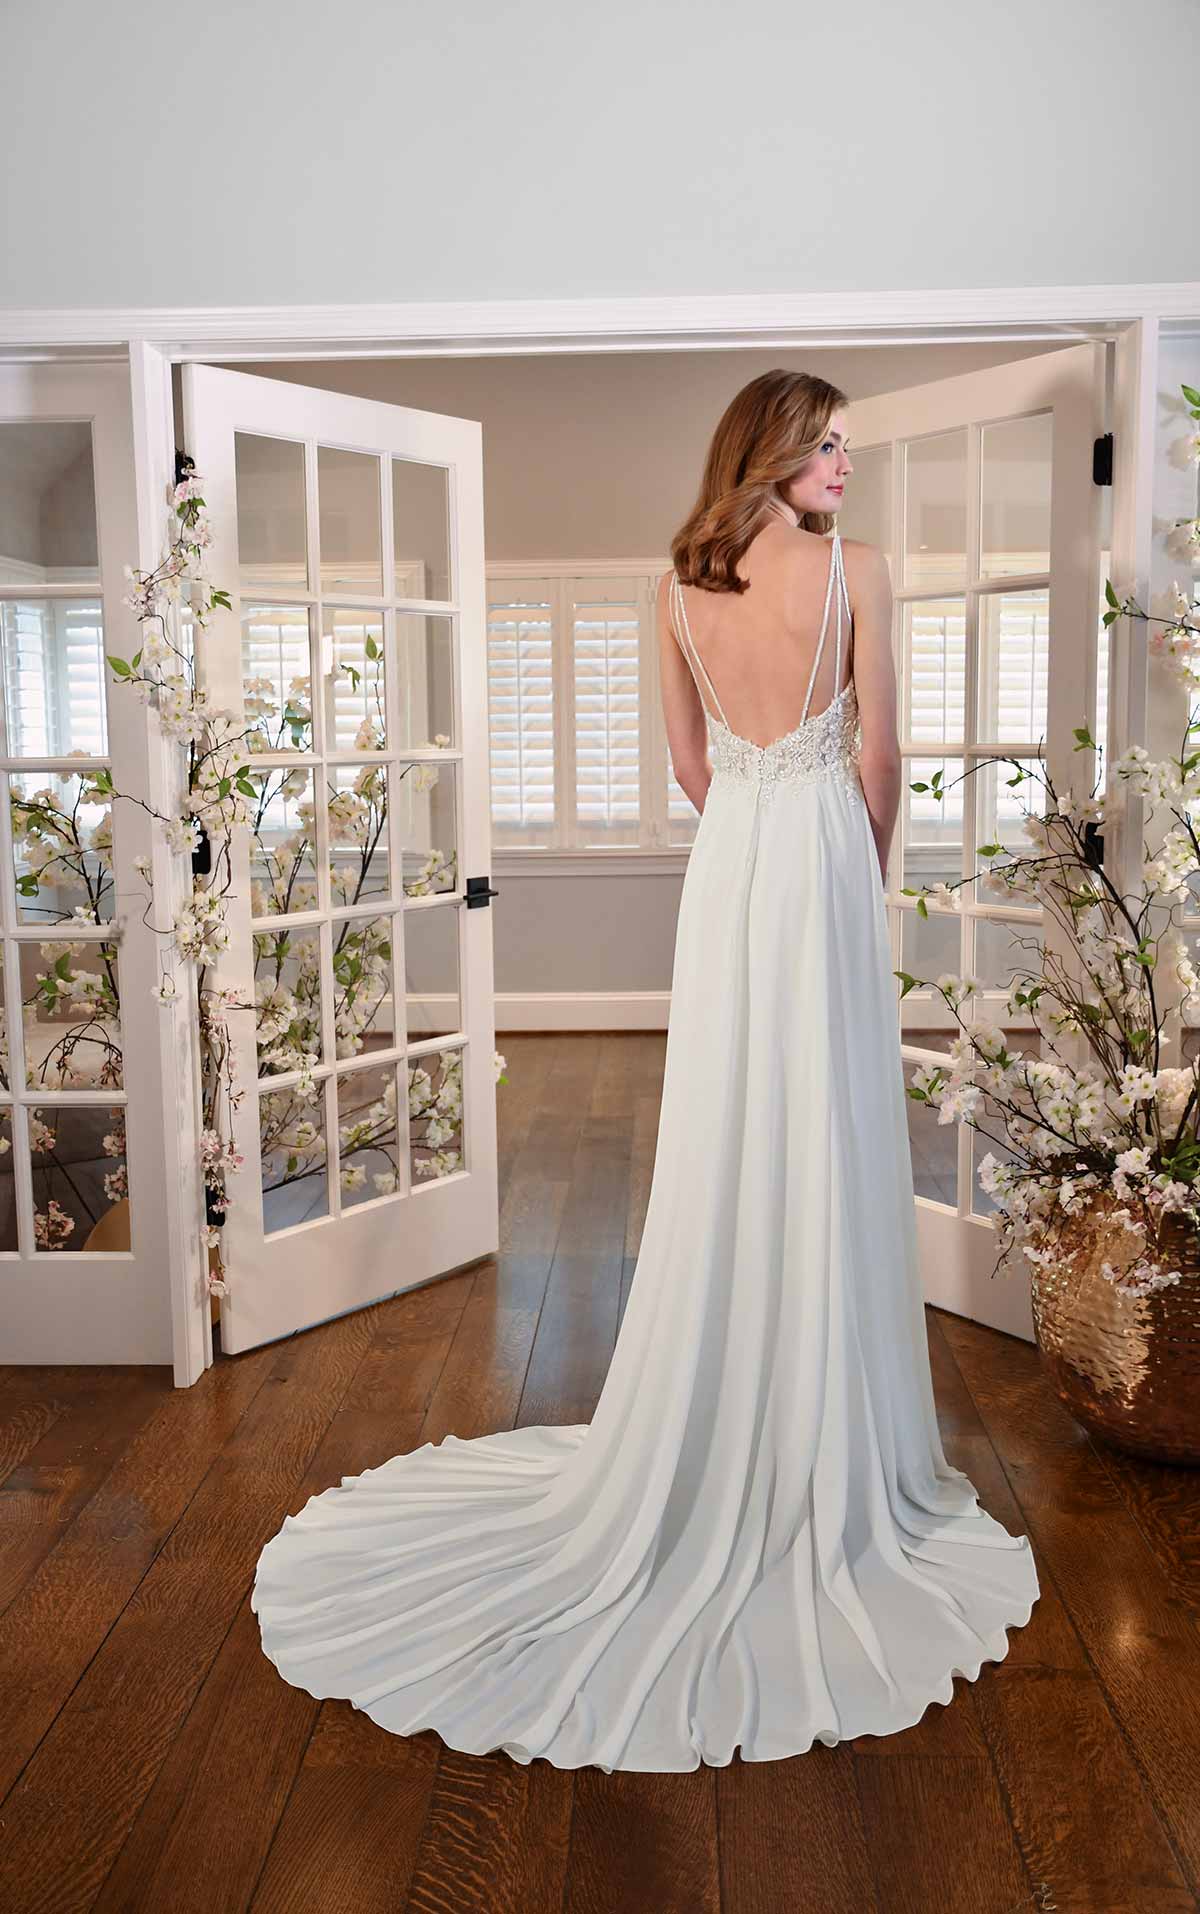 Stunning open back wedding gown with pearl straps and sexy side slit - off the peg wedding dress